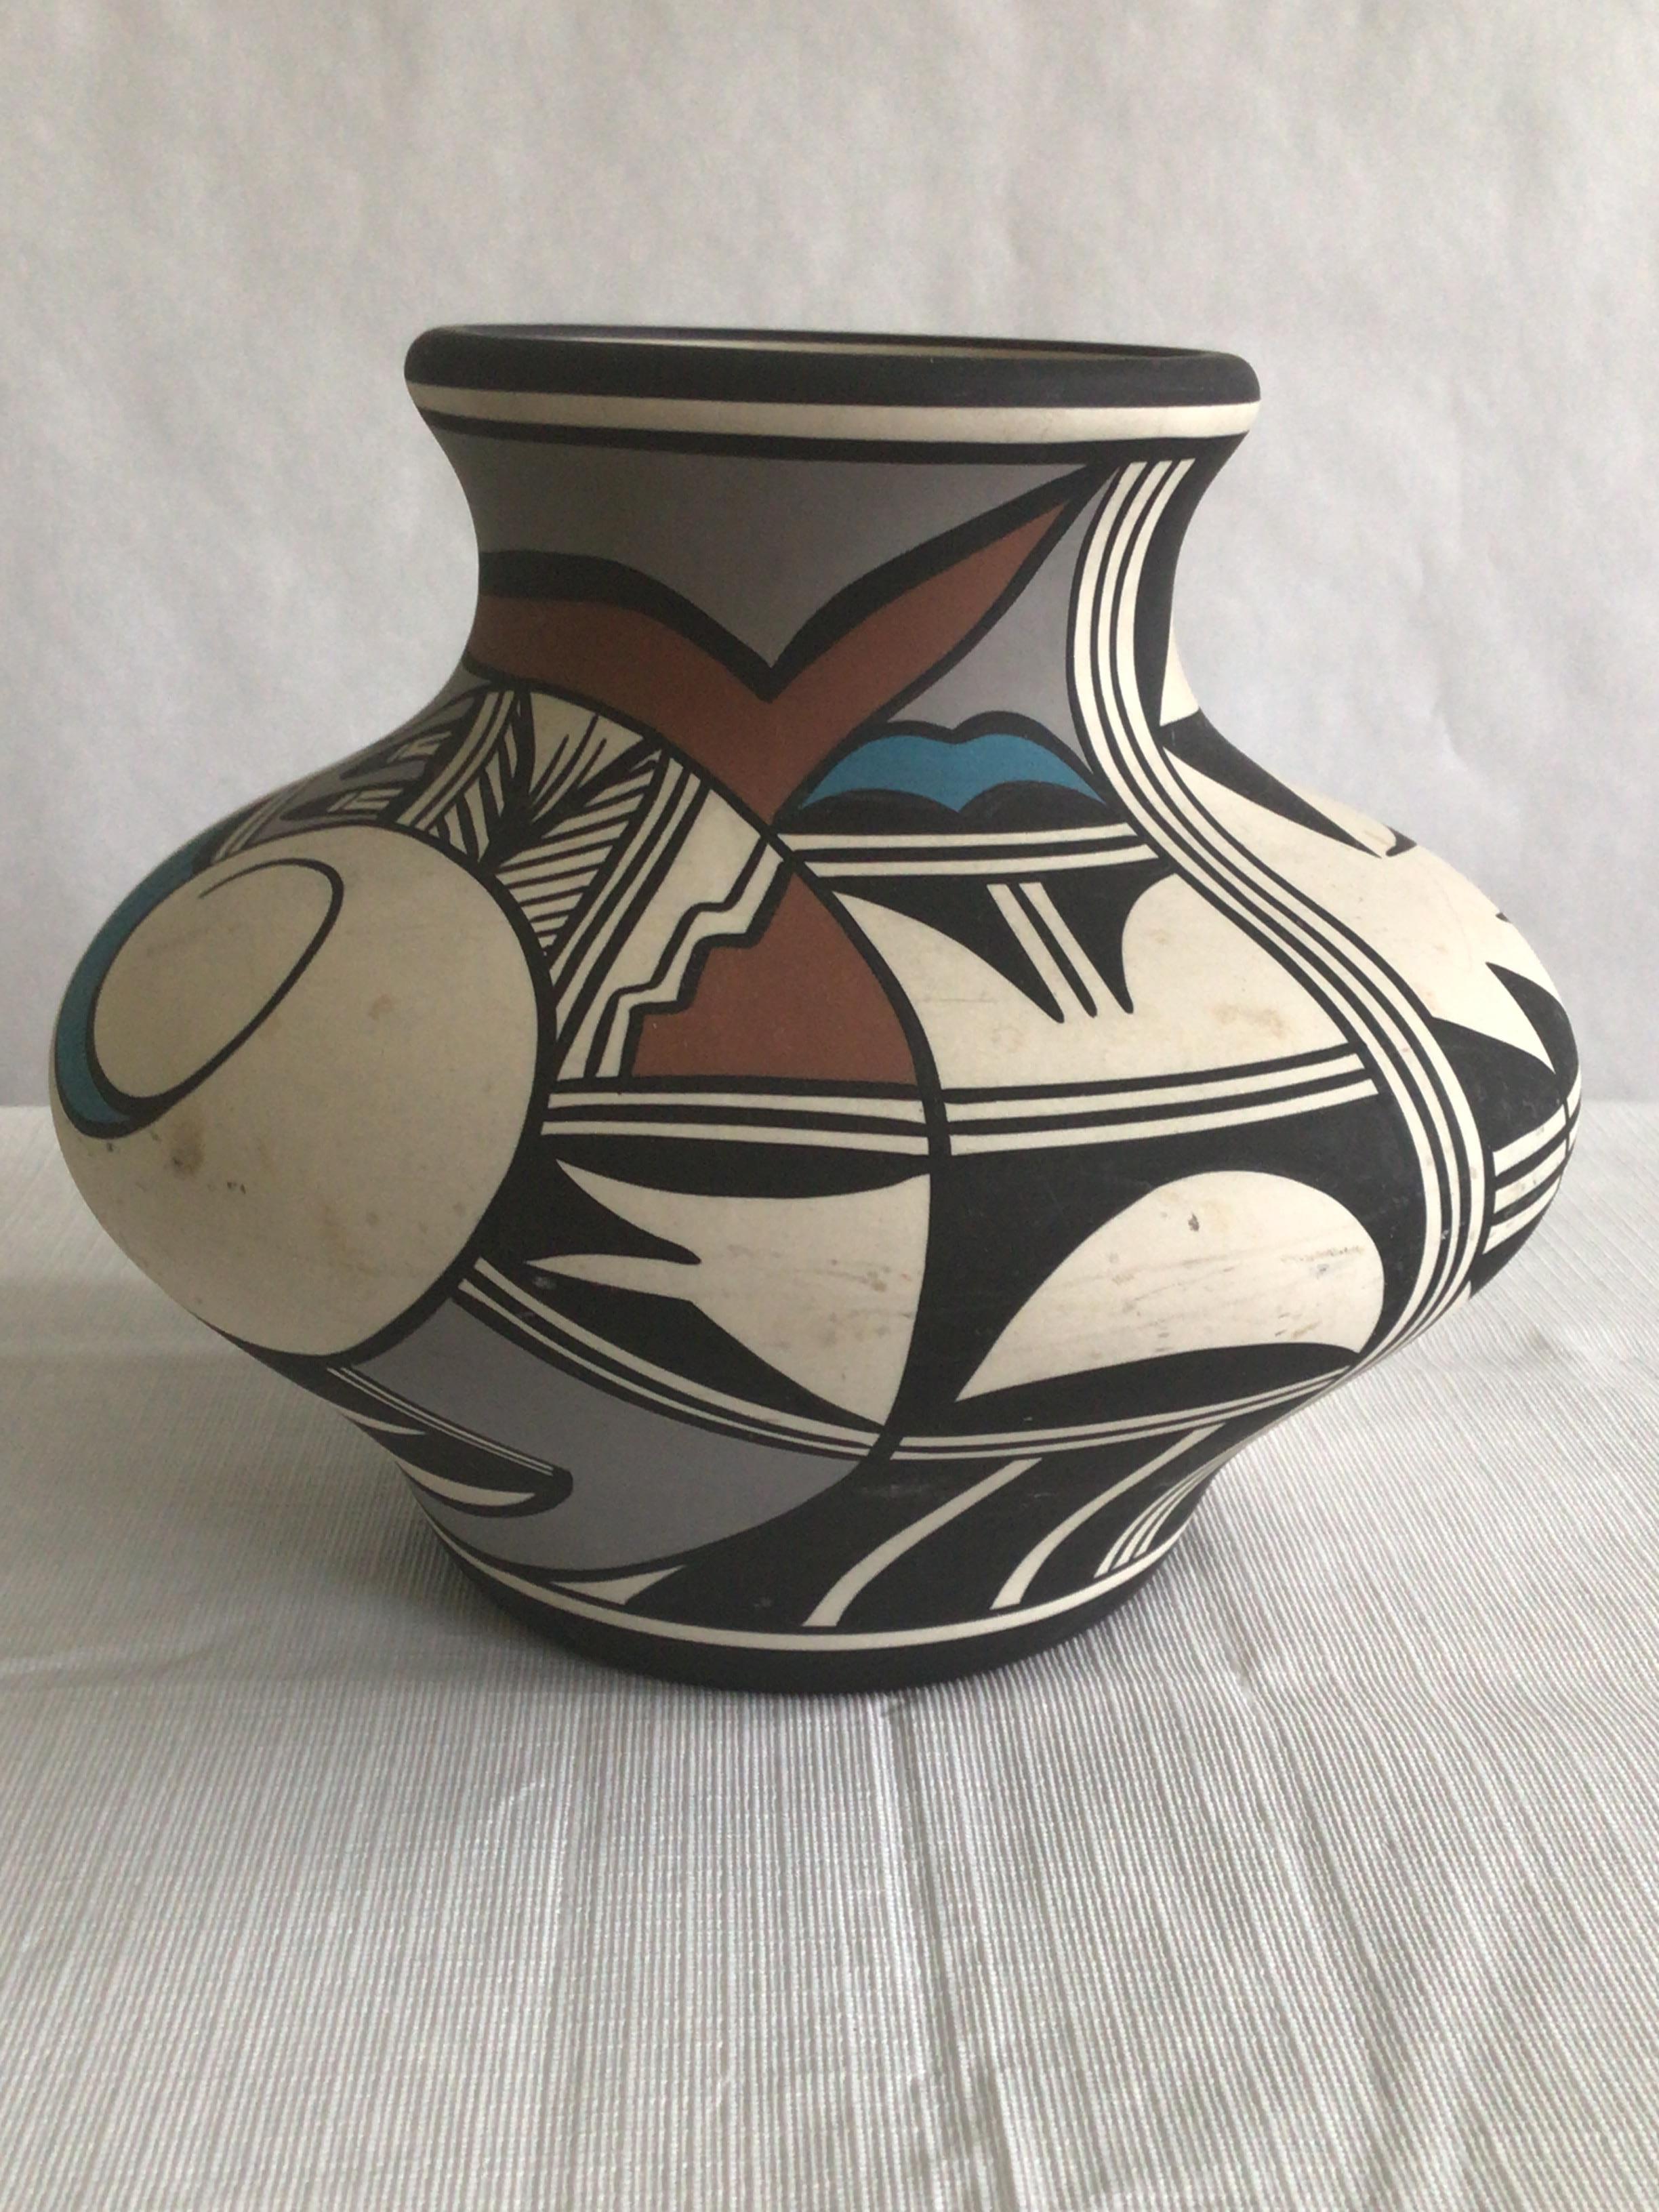 1970s Hand-Painted Native American Vase decorated with intricate geometric designs and natural pigment paints of black, brown, blue and grey on white clay. It is handmade from native clay, and pit fired in the traditional fashion.
Signed HapiBird